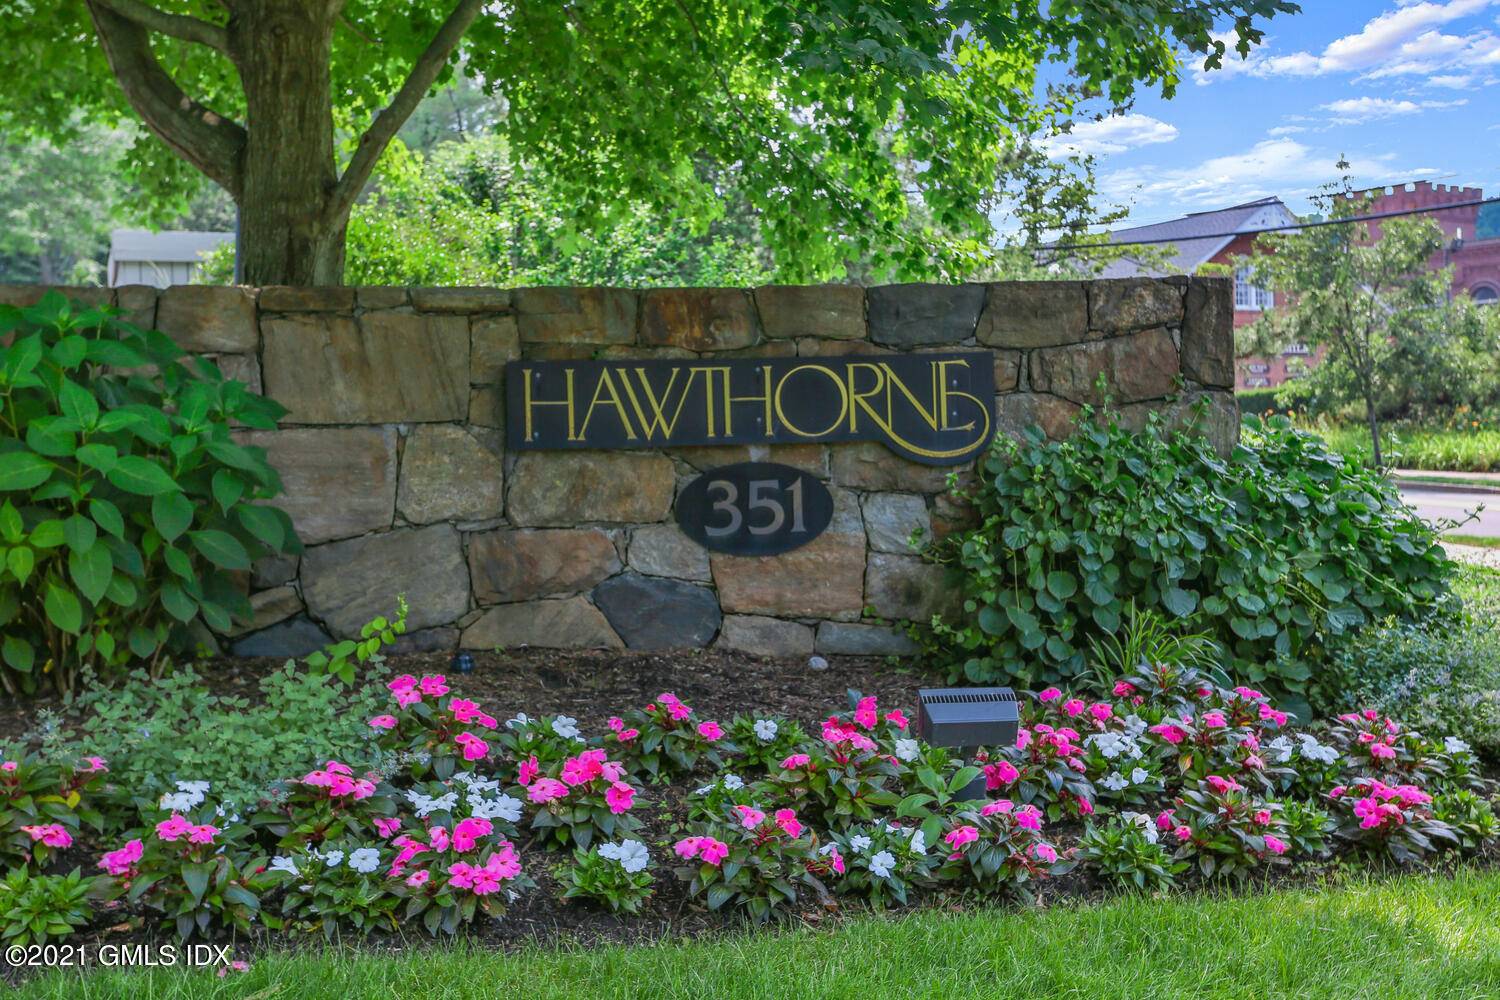 MOVE RIGHT IN ! ! Beautifully renovated 2021 condo in Hawthorne Association Glenville.